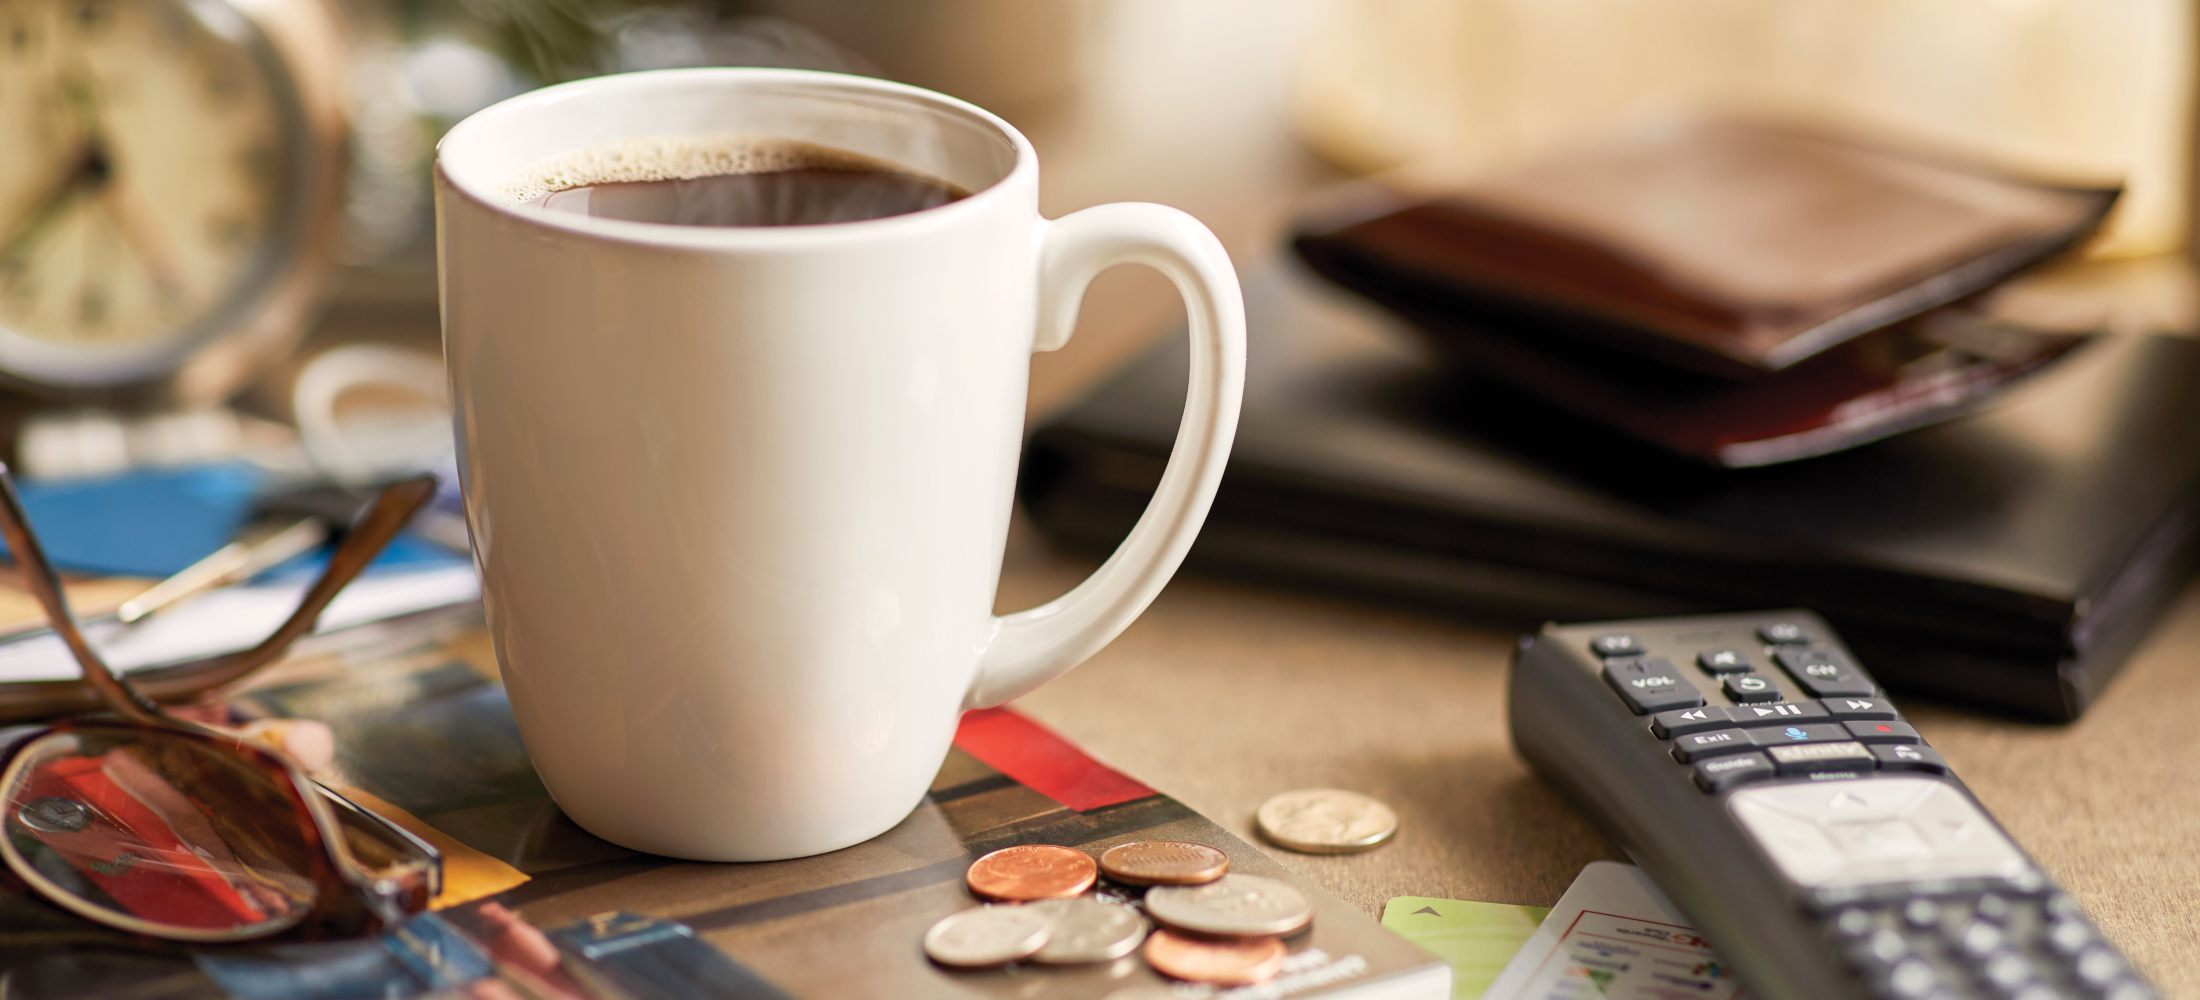 7 Common Keurig Questions and Answers